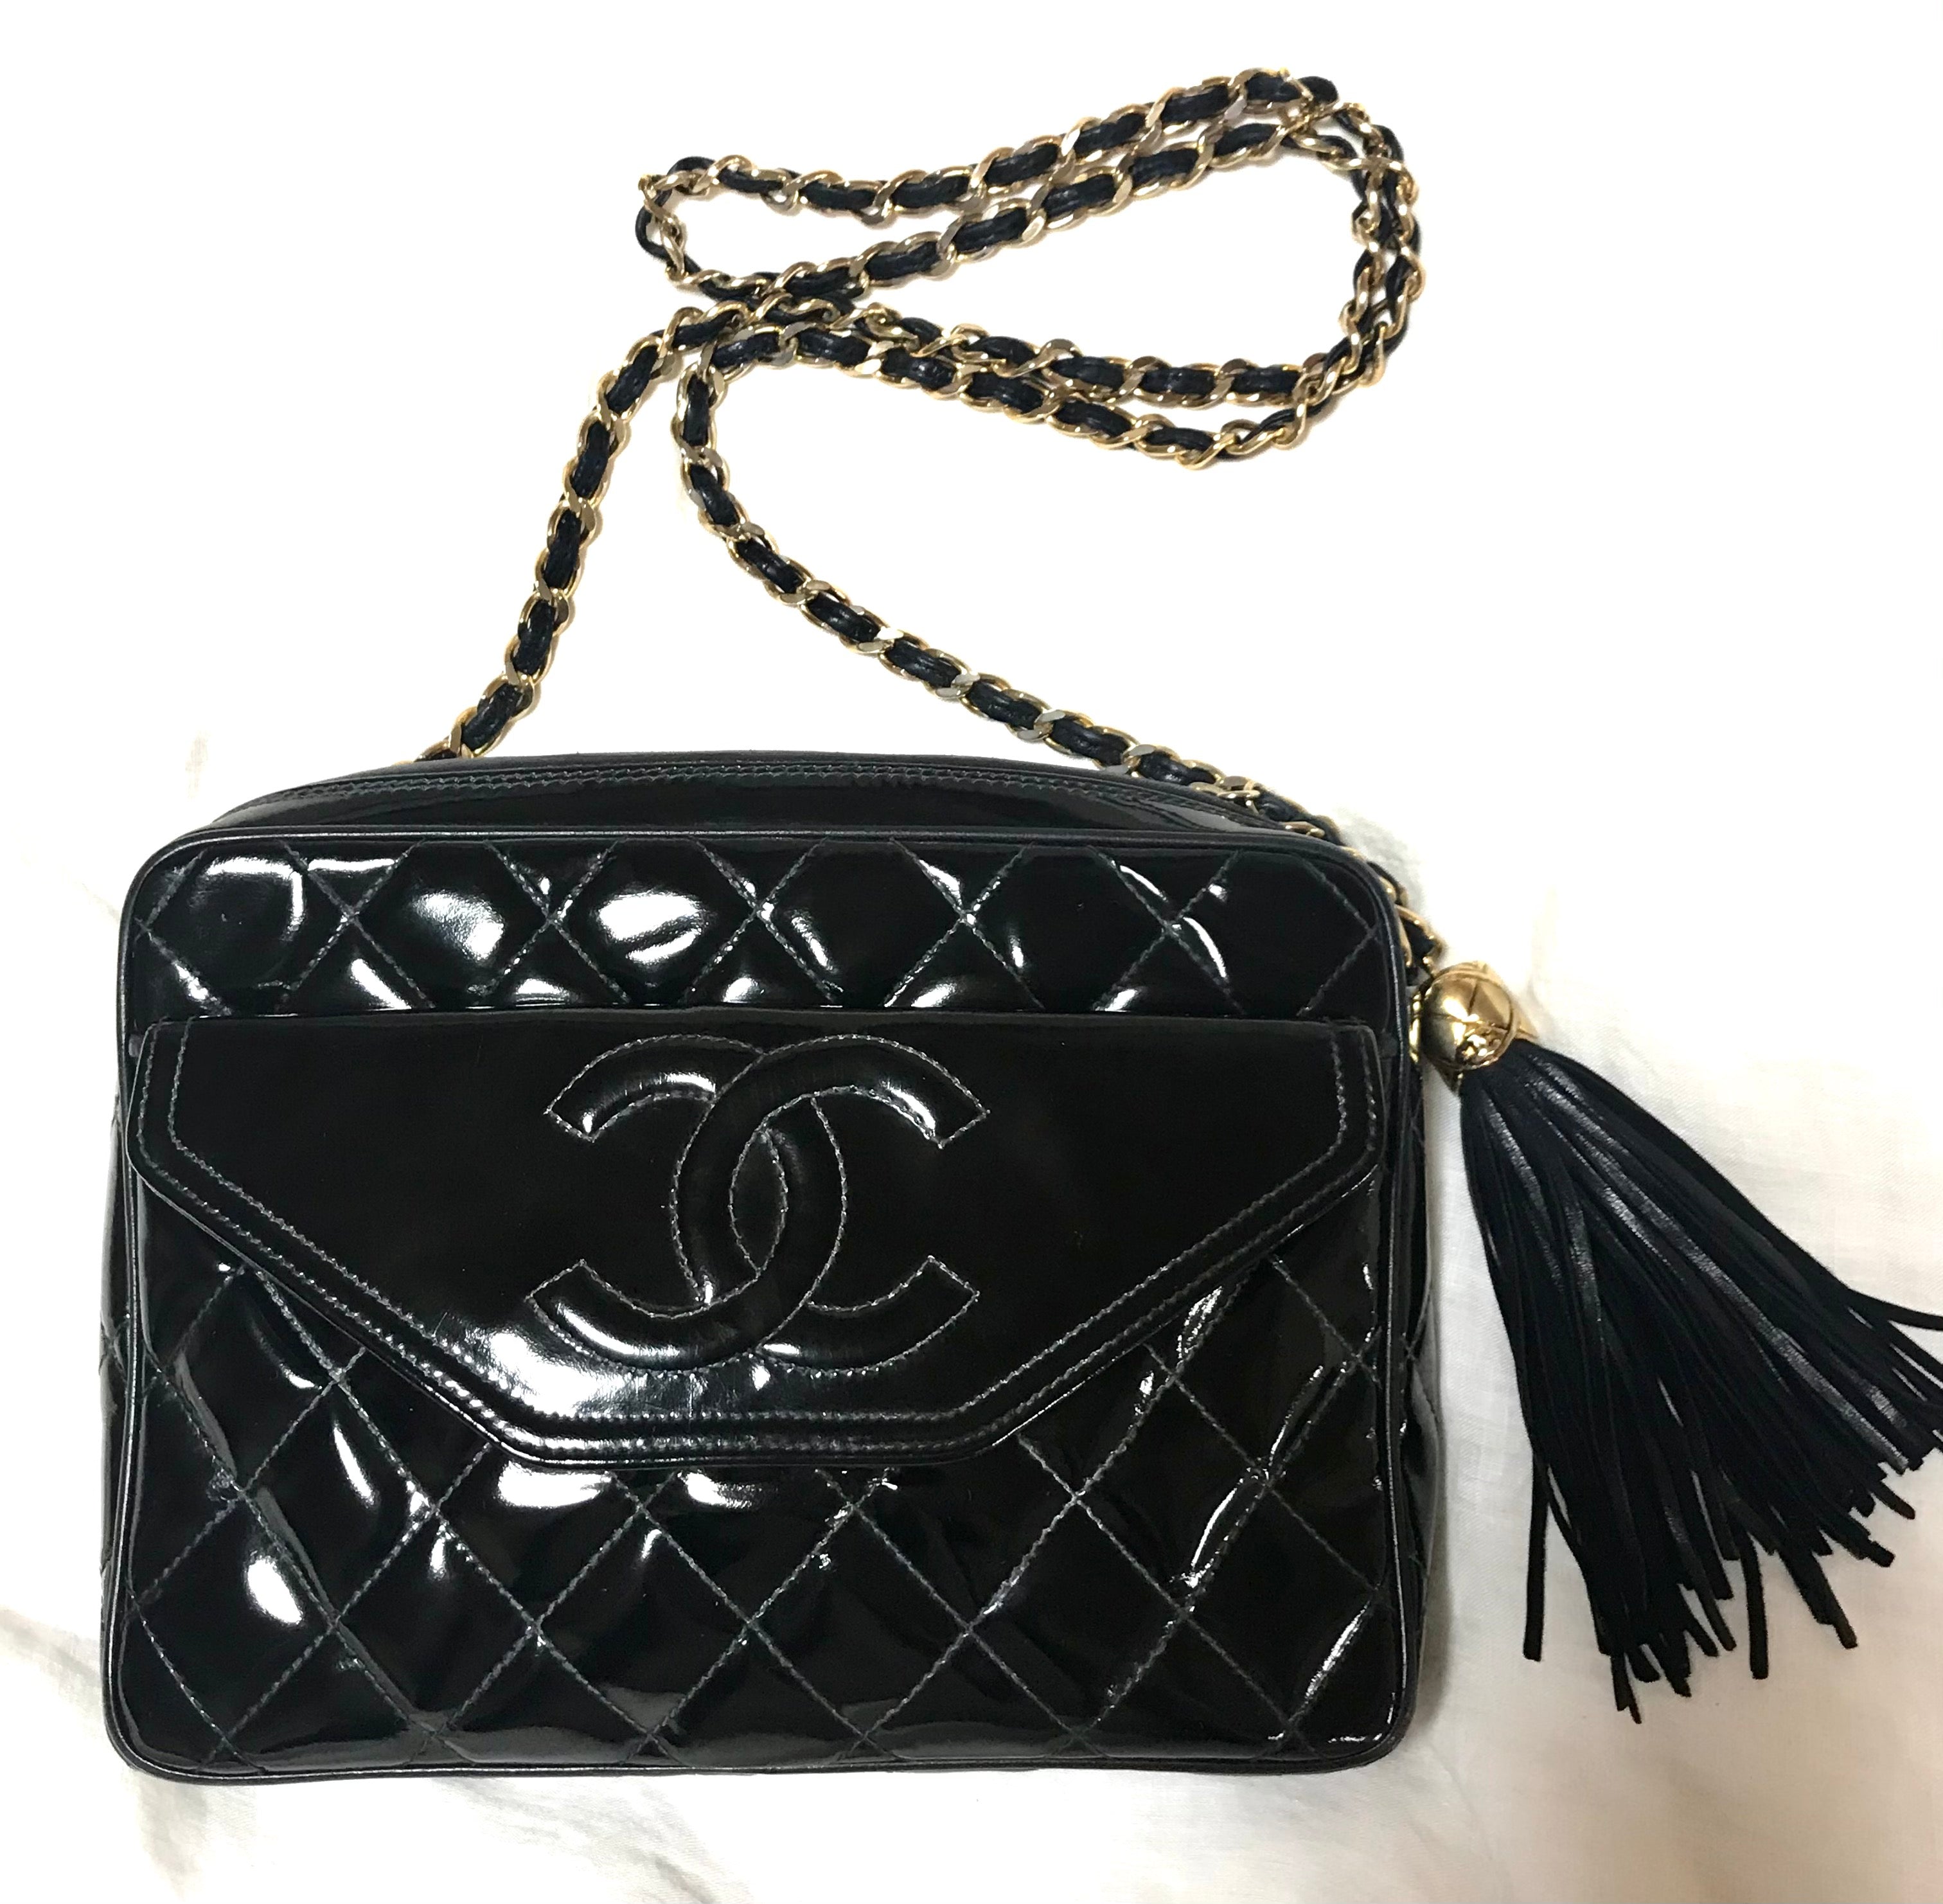 CHANEL Embossed Handbag in Black - More Than You Can Imagine